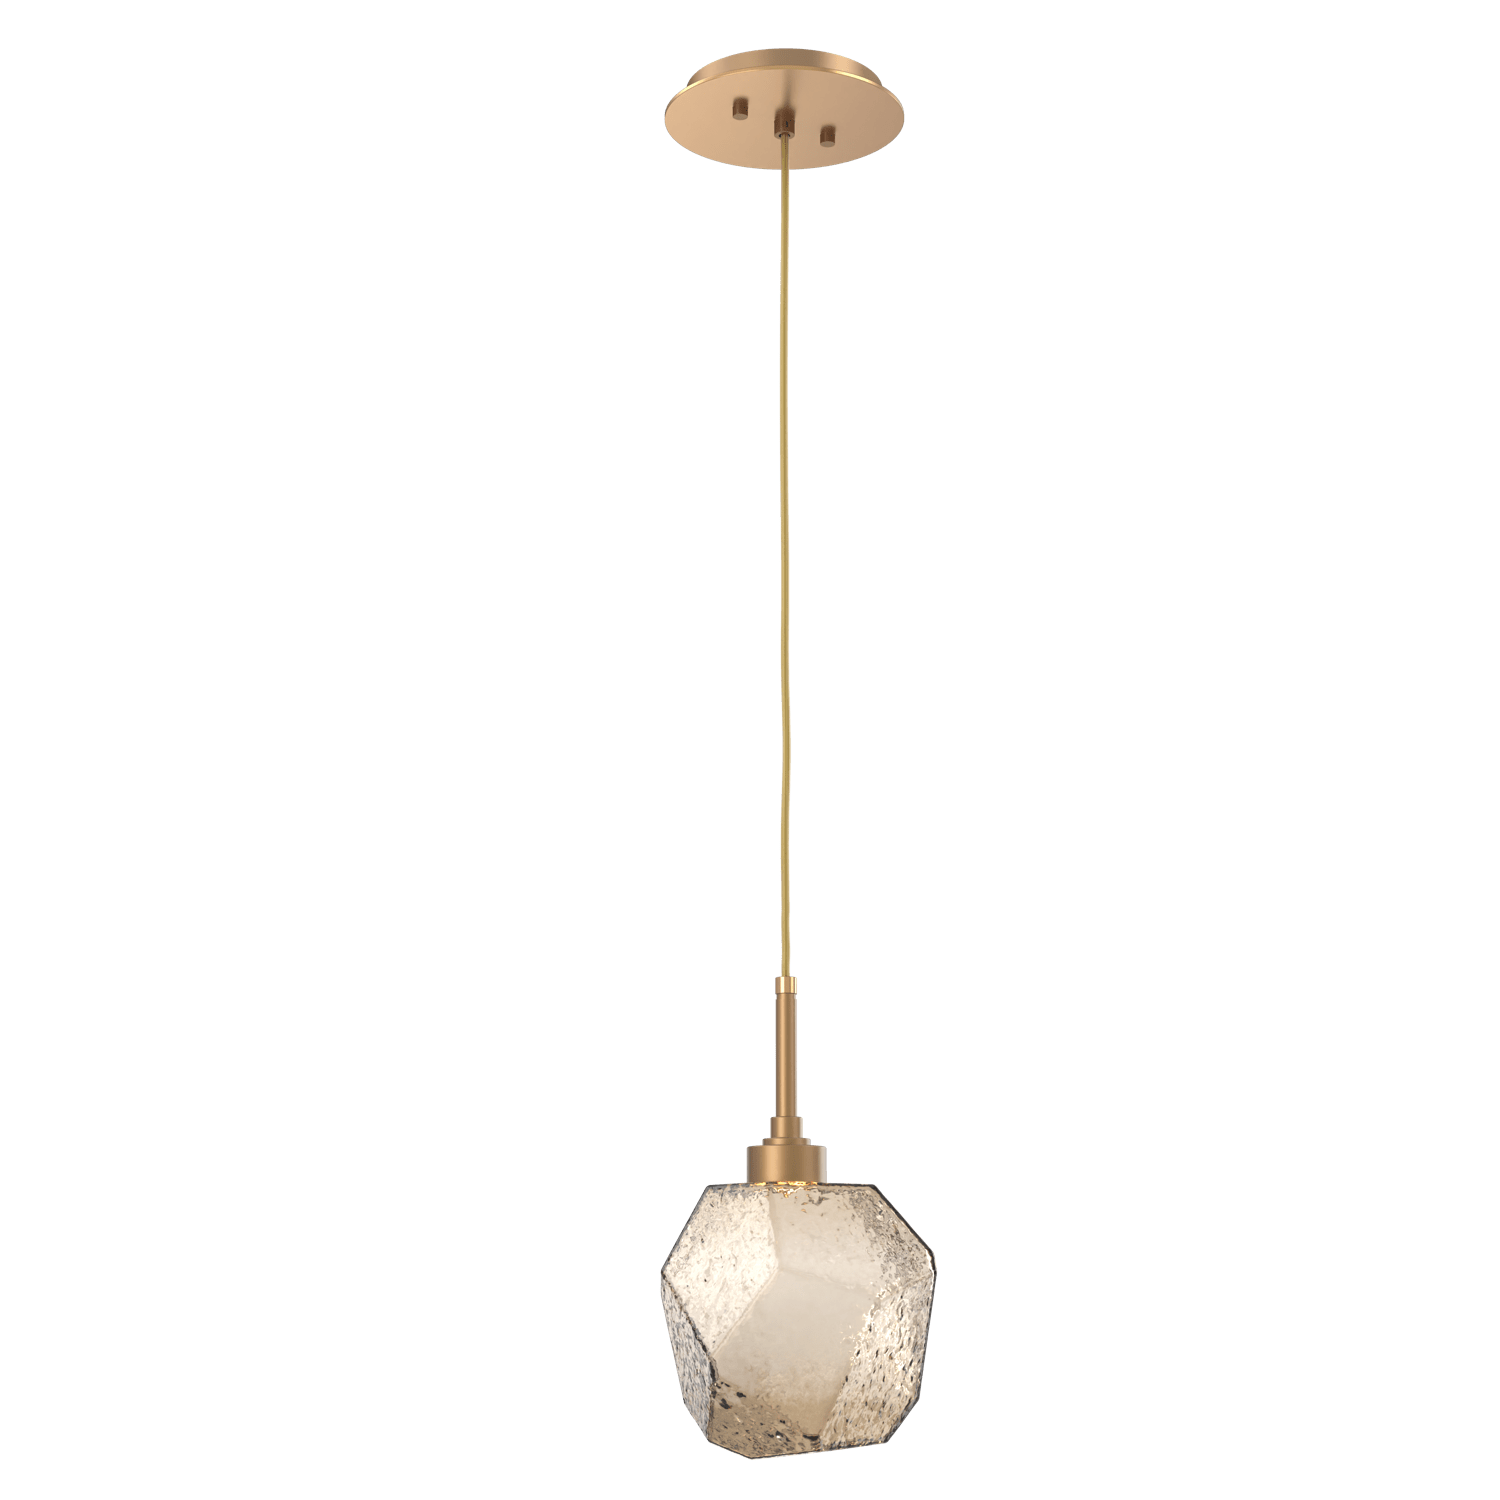 LAB0039-01-NB-B-Hammerton-Studio-Gem-pendant-light-with-novel-brass-finish-and-bronze-blown-glass-shades-and-LED-lamping